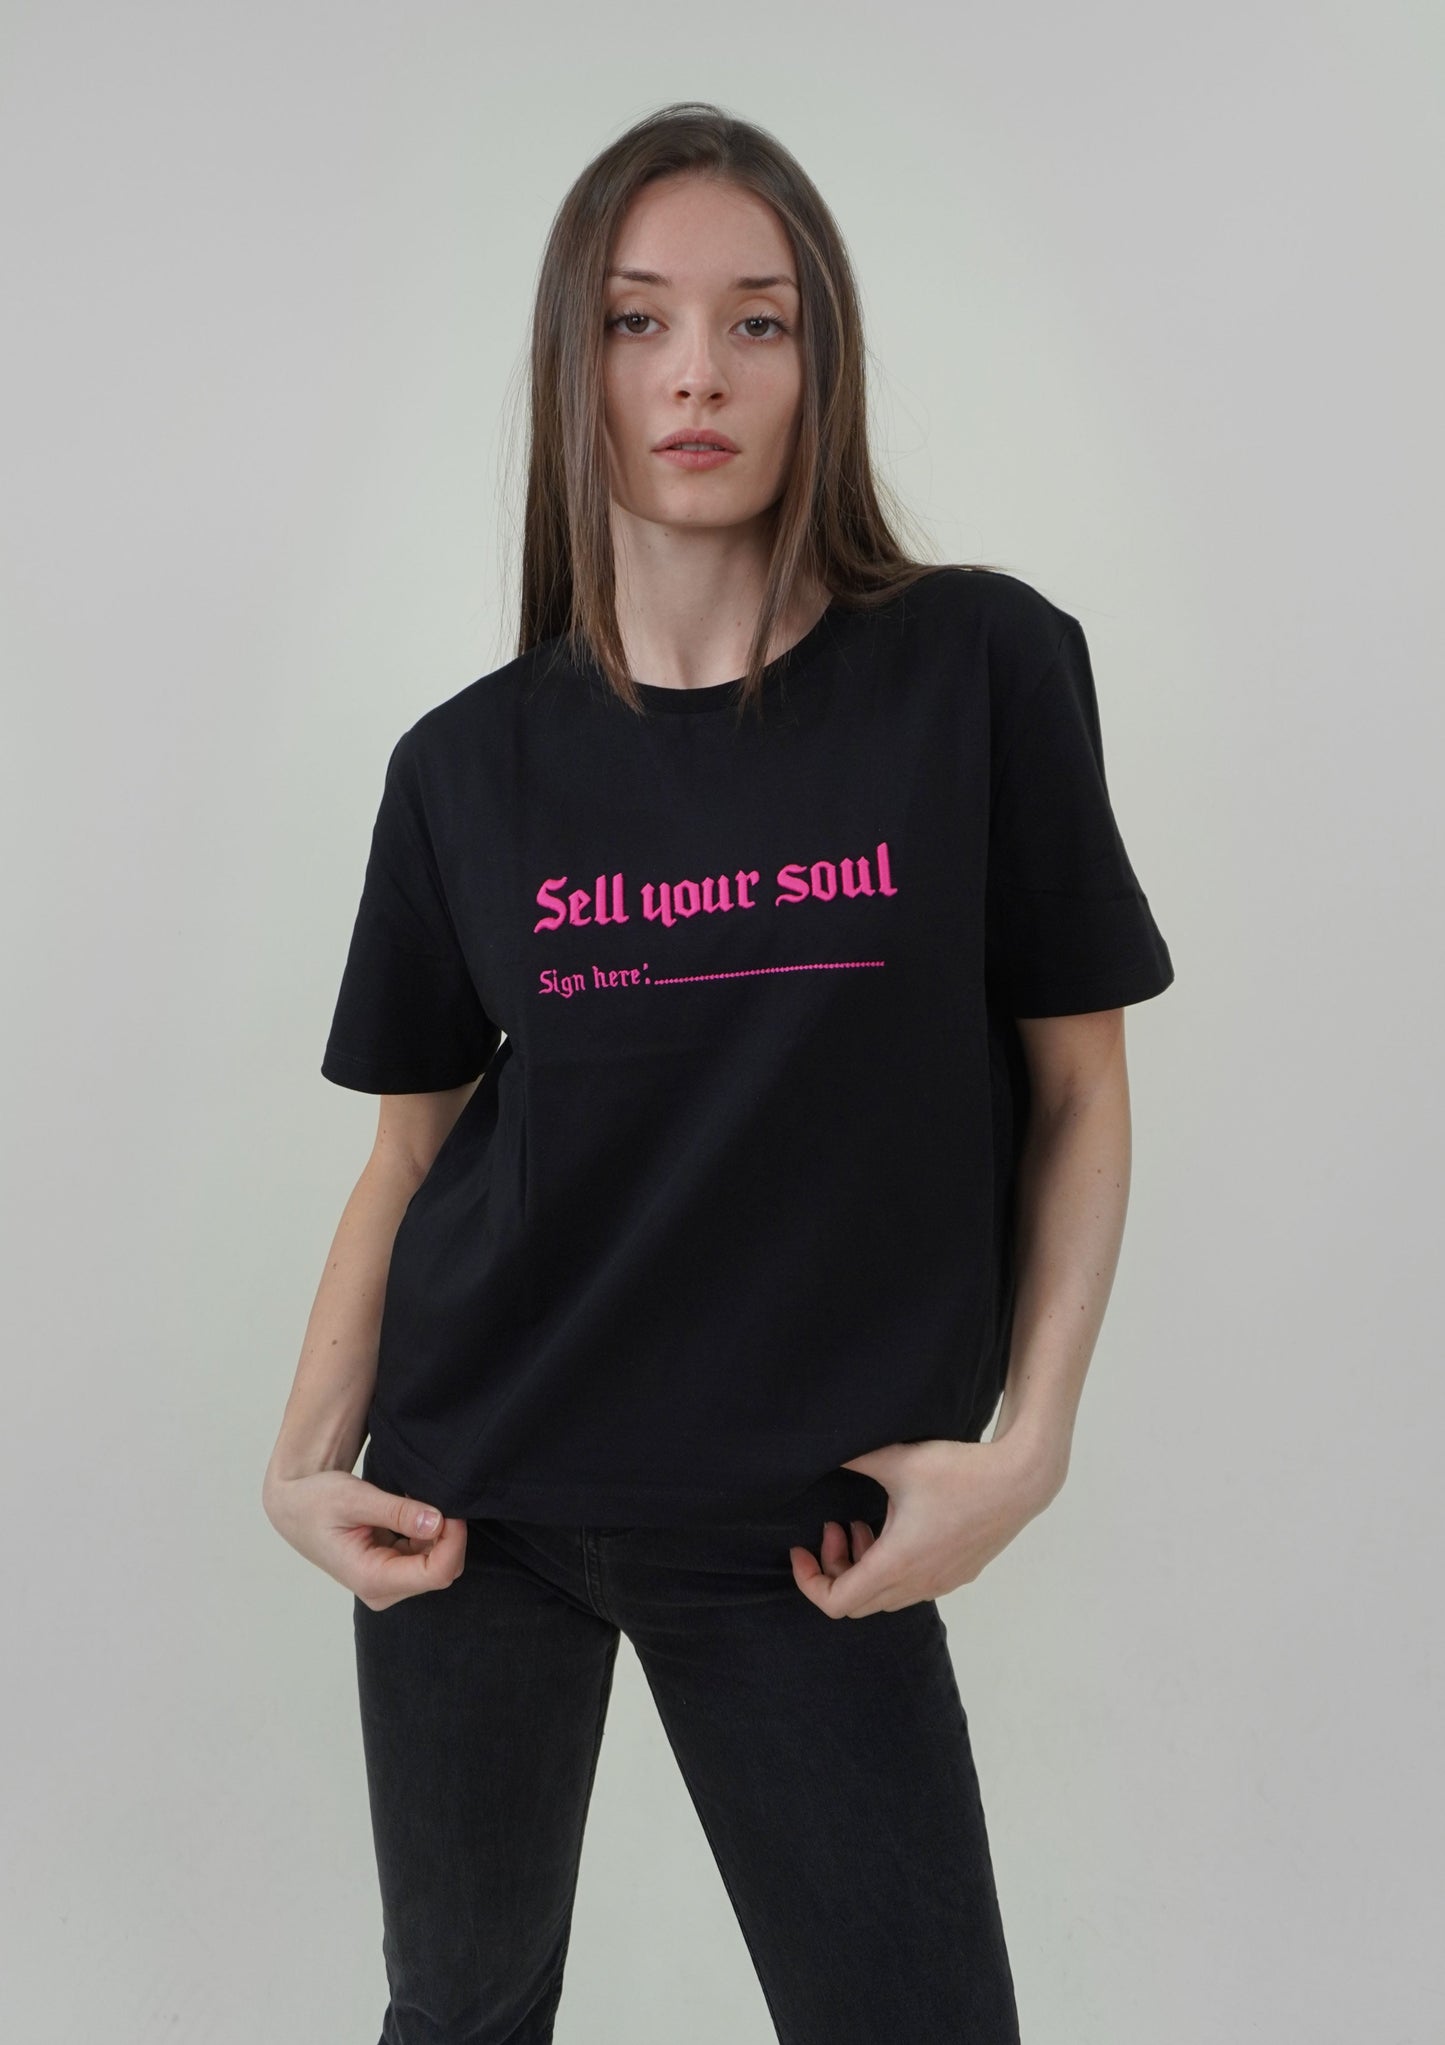 “Sell your soul" Oversized Short T-Shirt